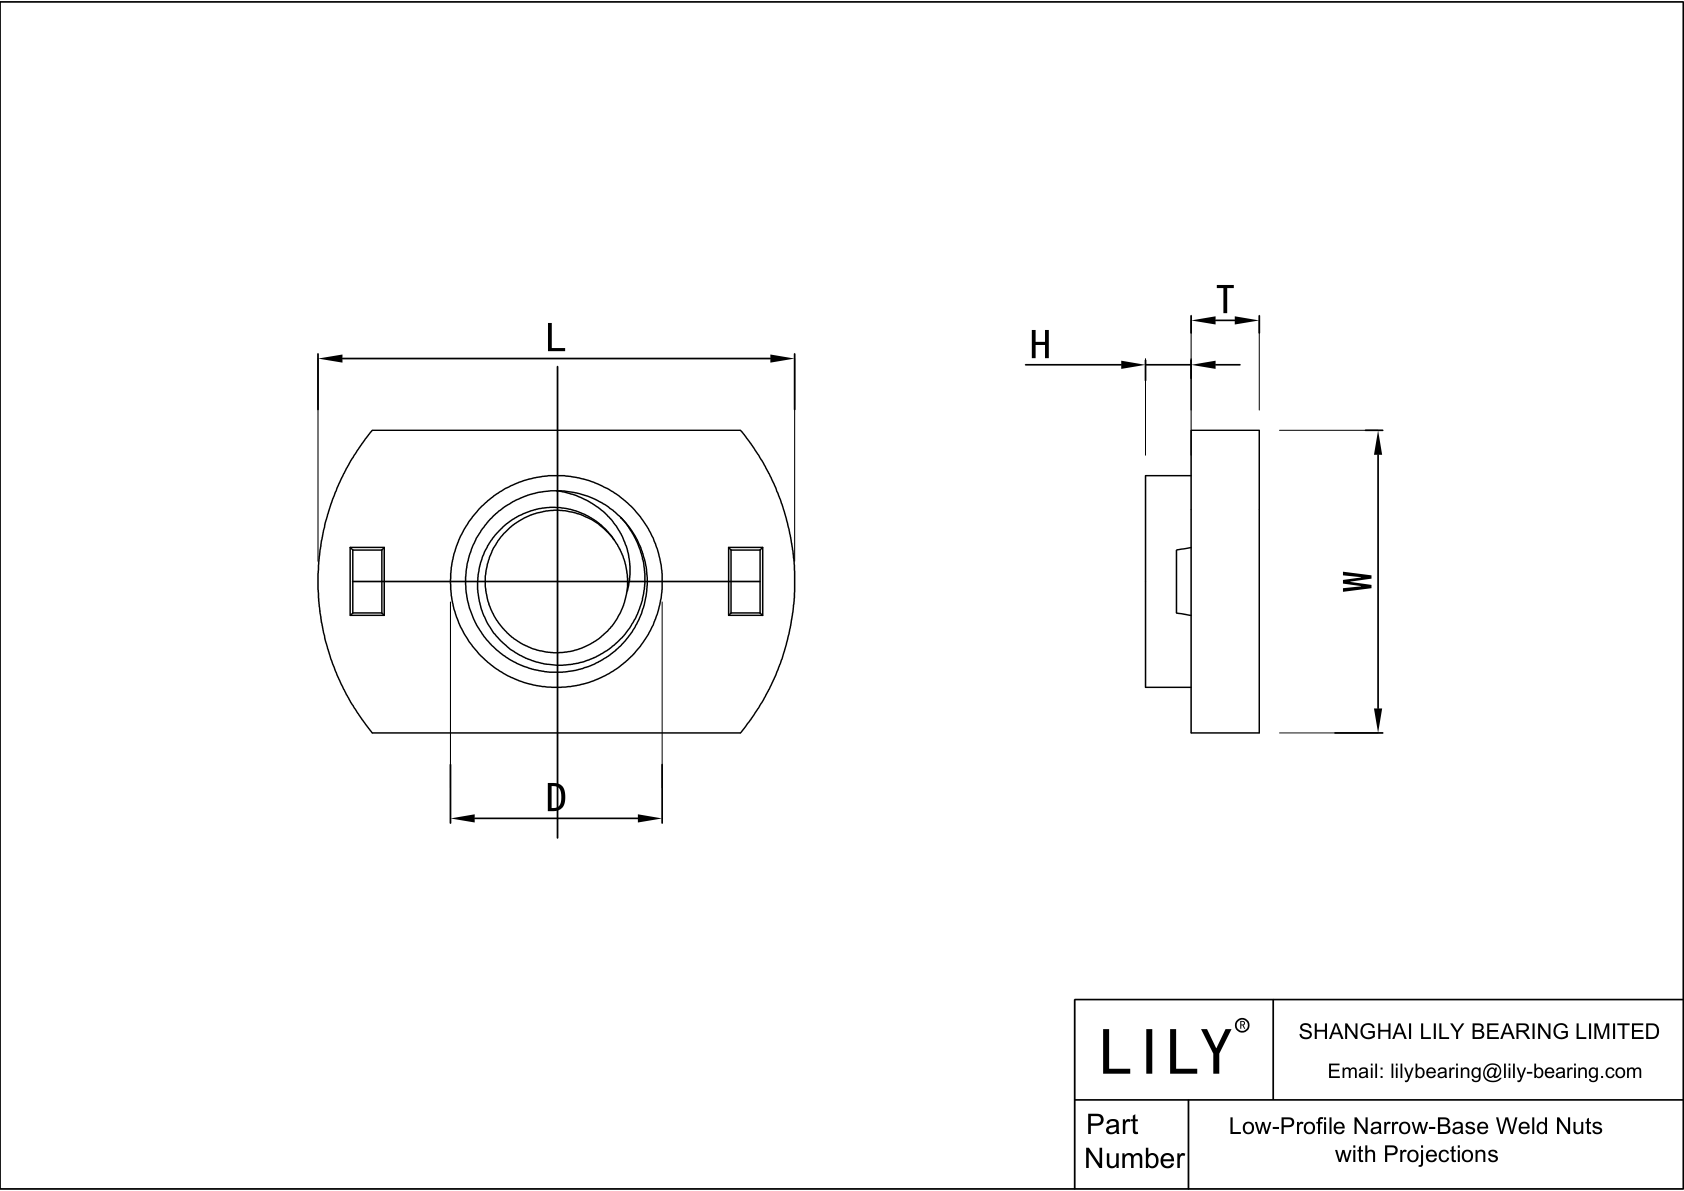 JIGJHAIAA Low-Profile Narrow-Base Weld Nuts with Projections cad drawing